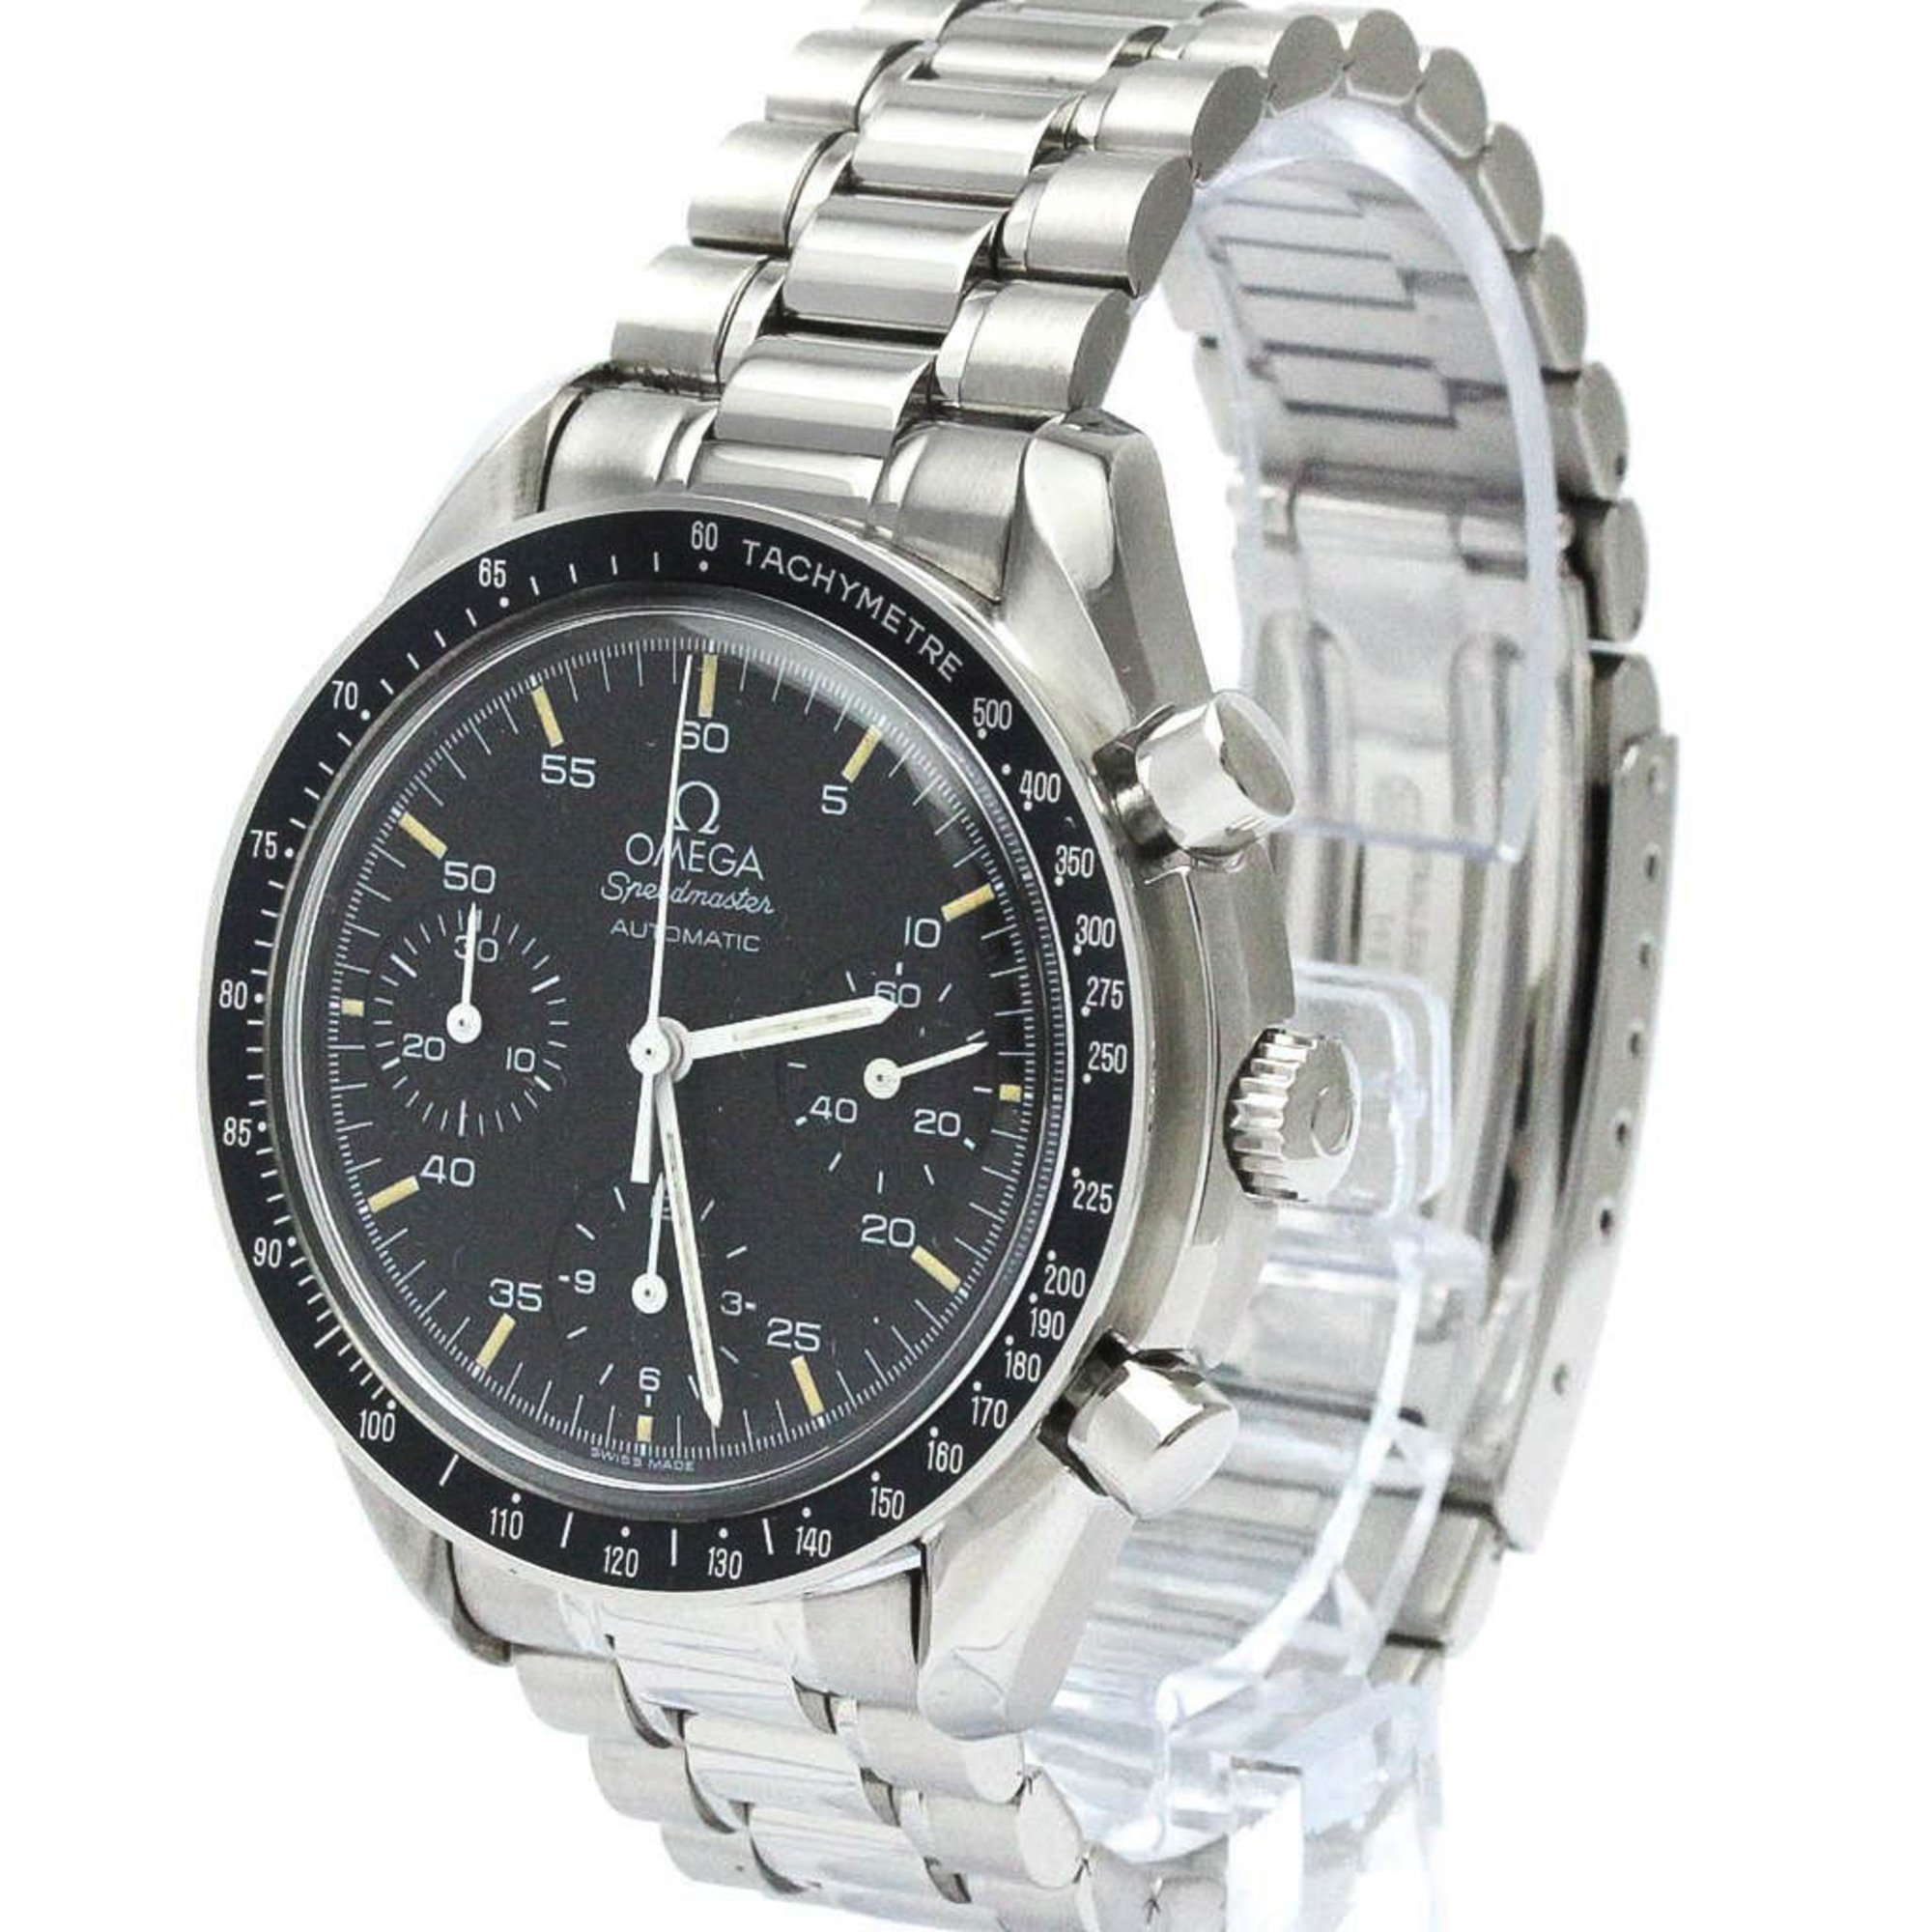 Polished OMEGA Speedmaster Automatic Steel Mens Watch 3510.50 BF565471